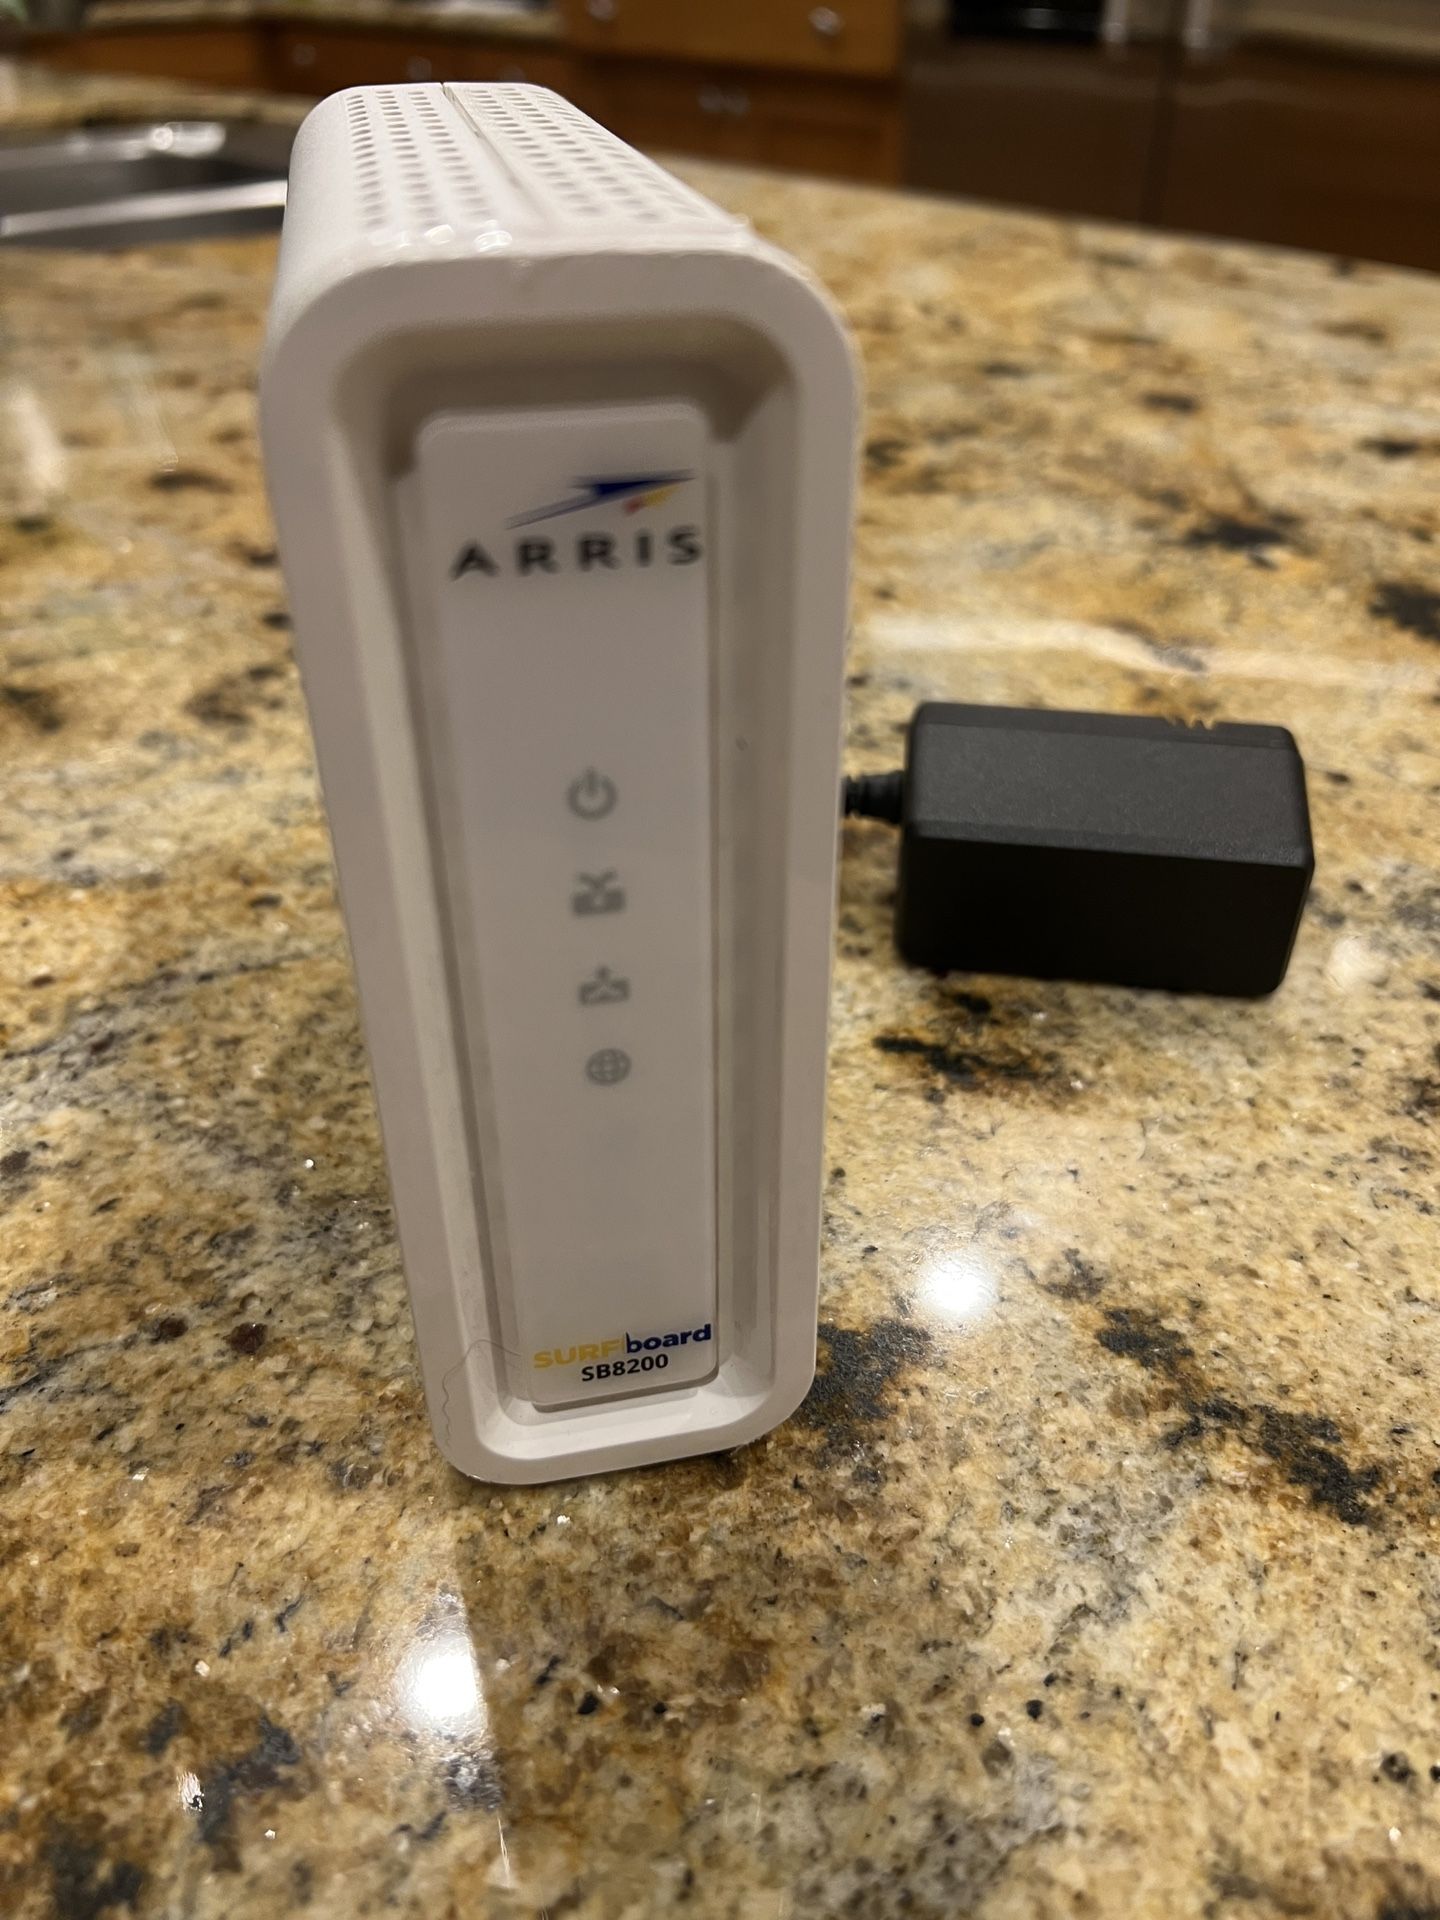 Arris b8200 High Speed Modem For Cox, Comcast, Xfinity And Others